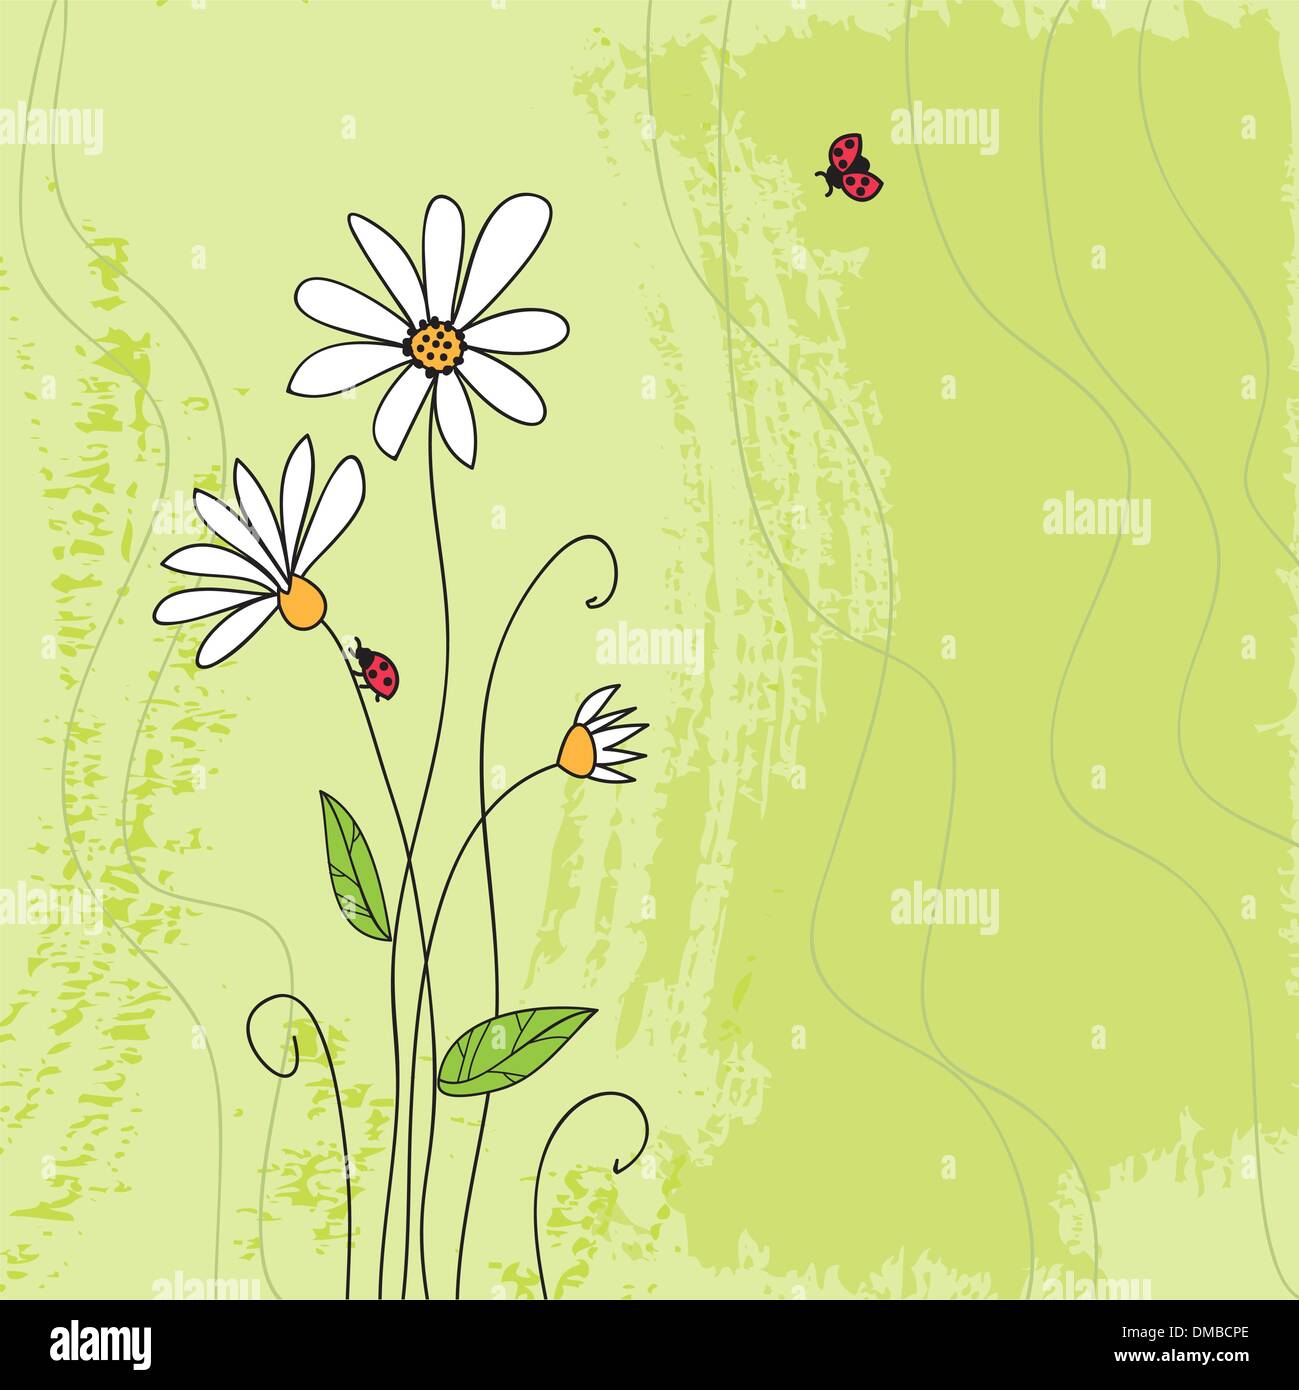 Ladybug on chamomile flower and grunge green grass background Stock Vector